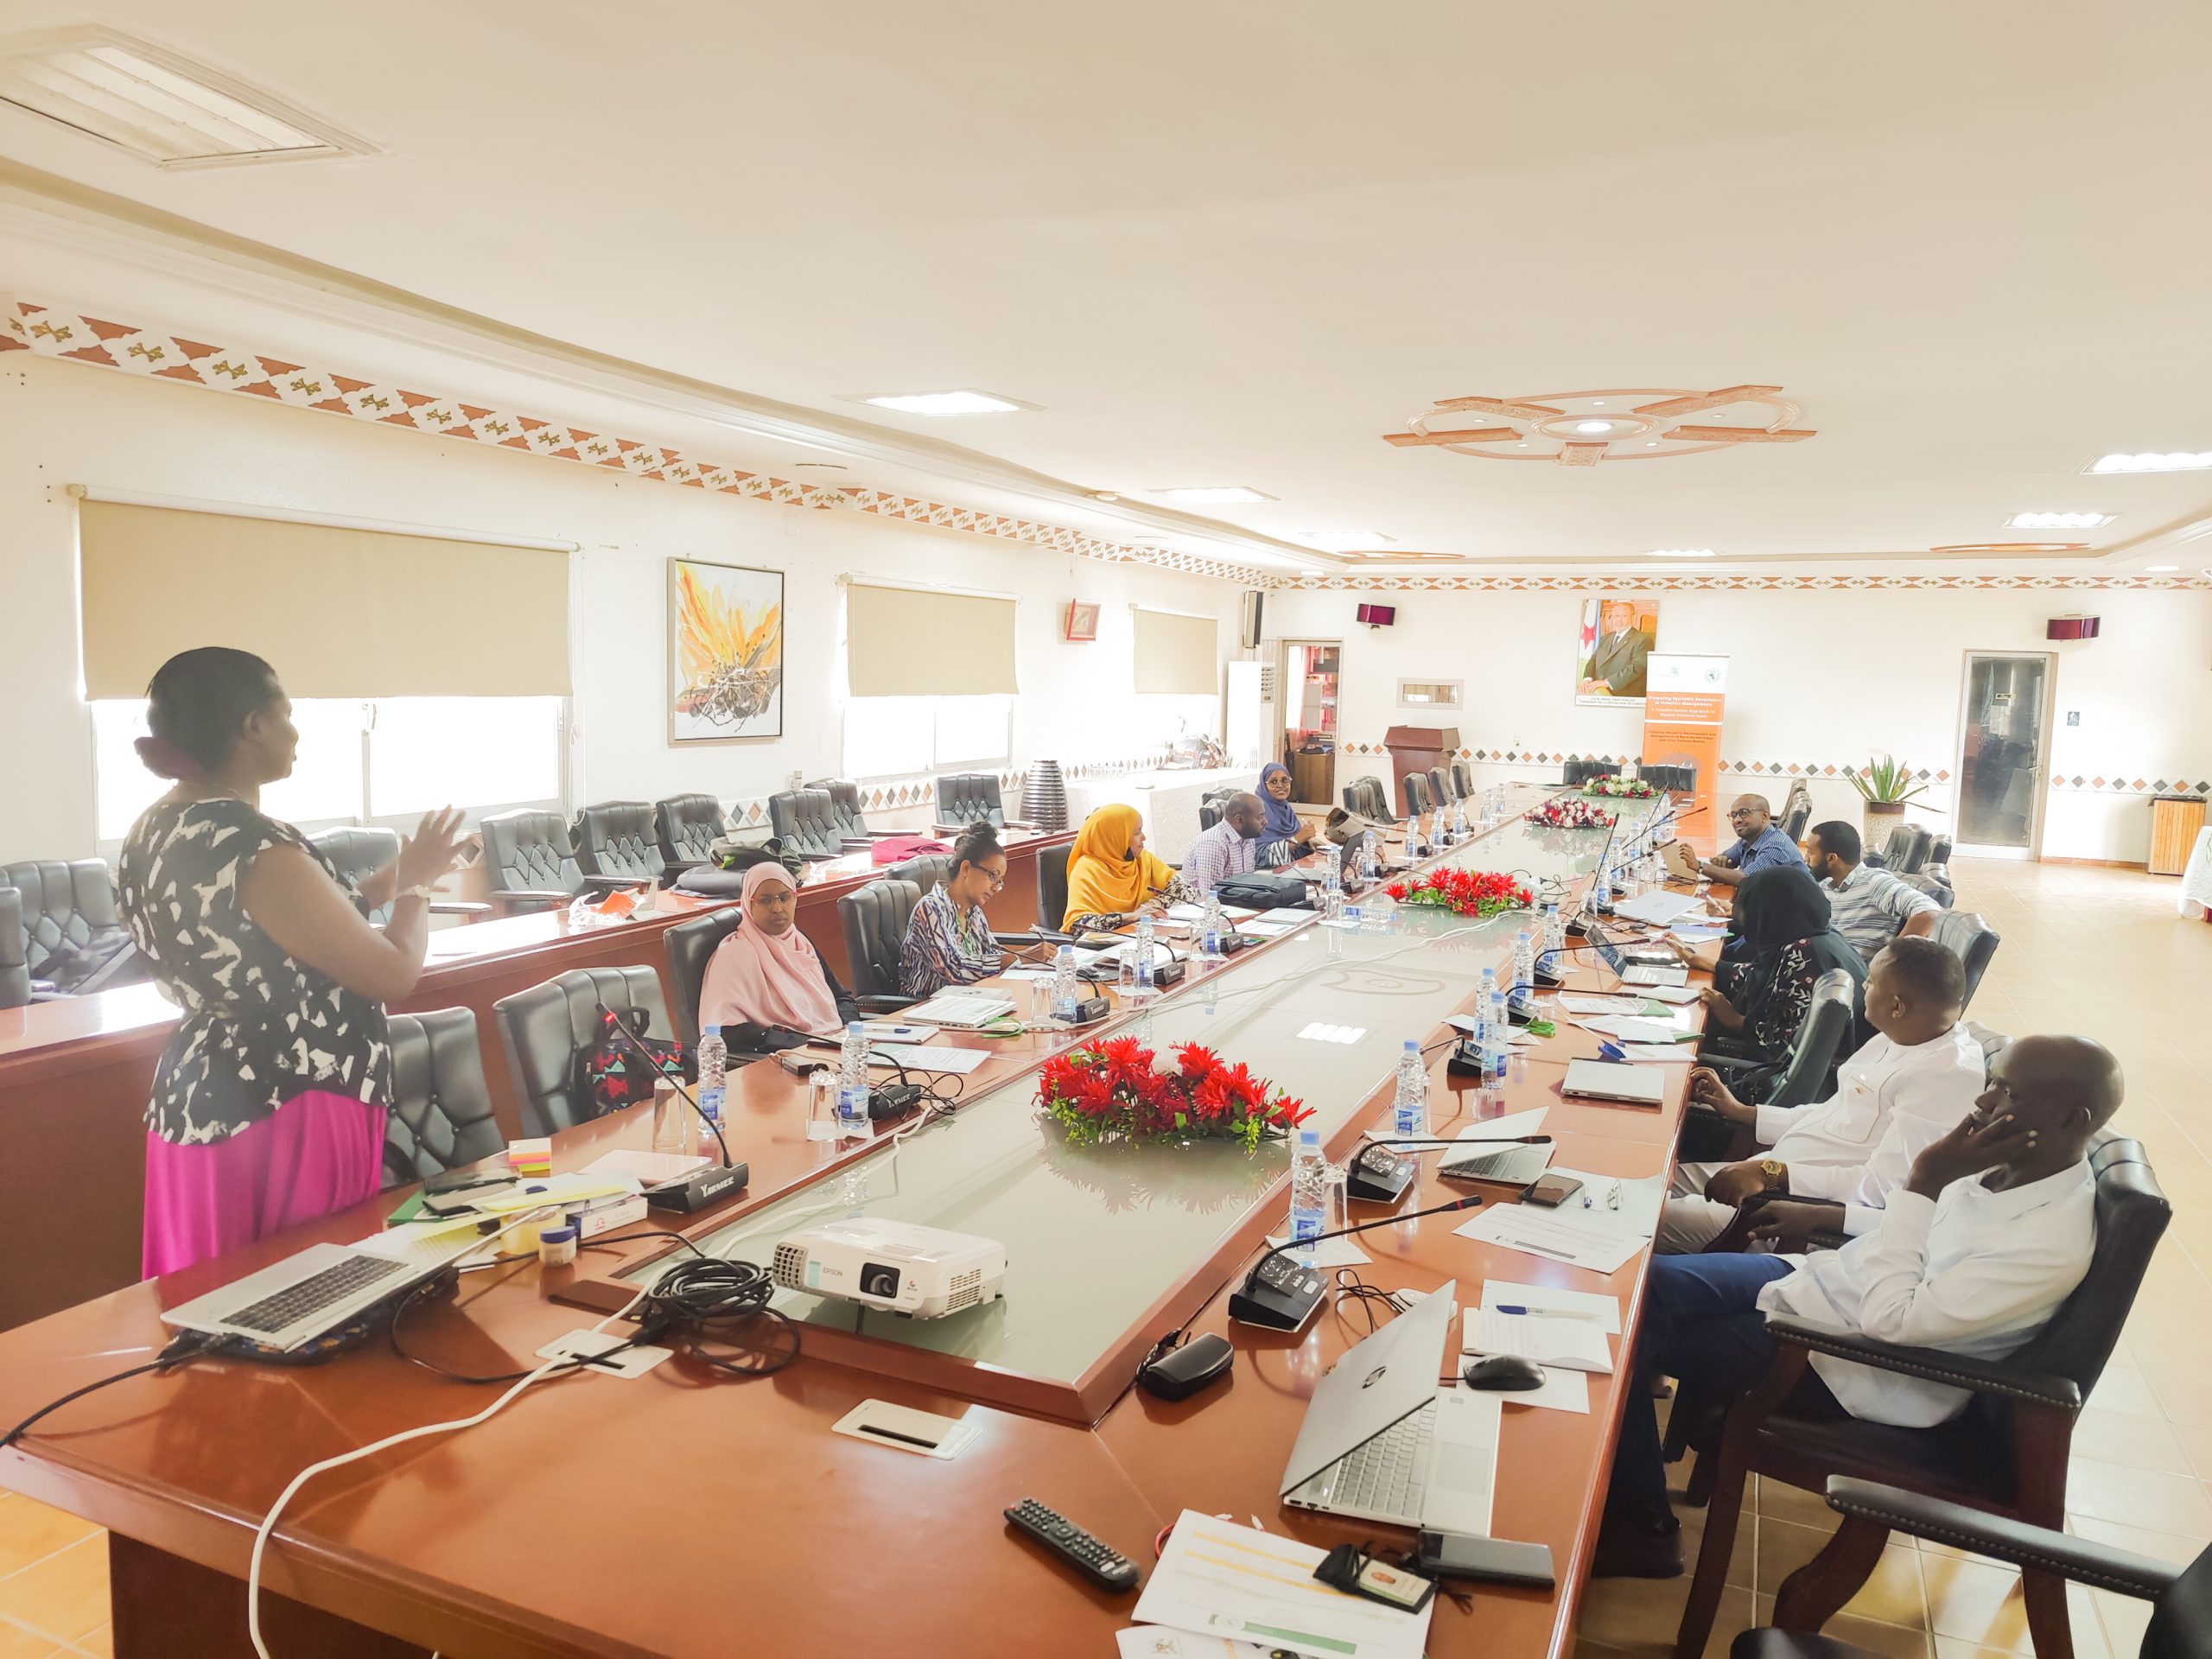 IGAD Agriculture and Environment Staff Train on Gender Mainstreaming